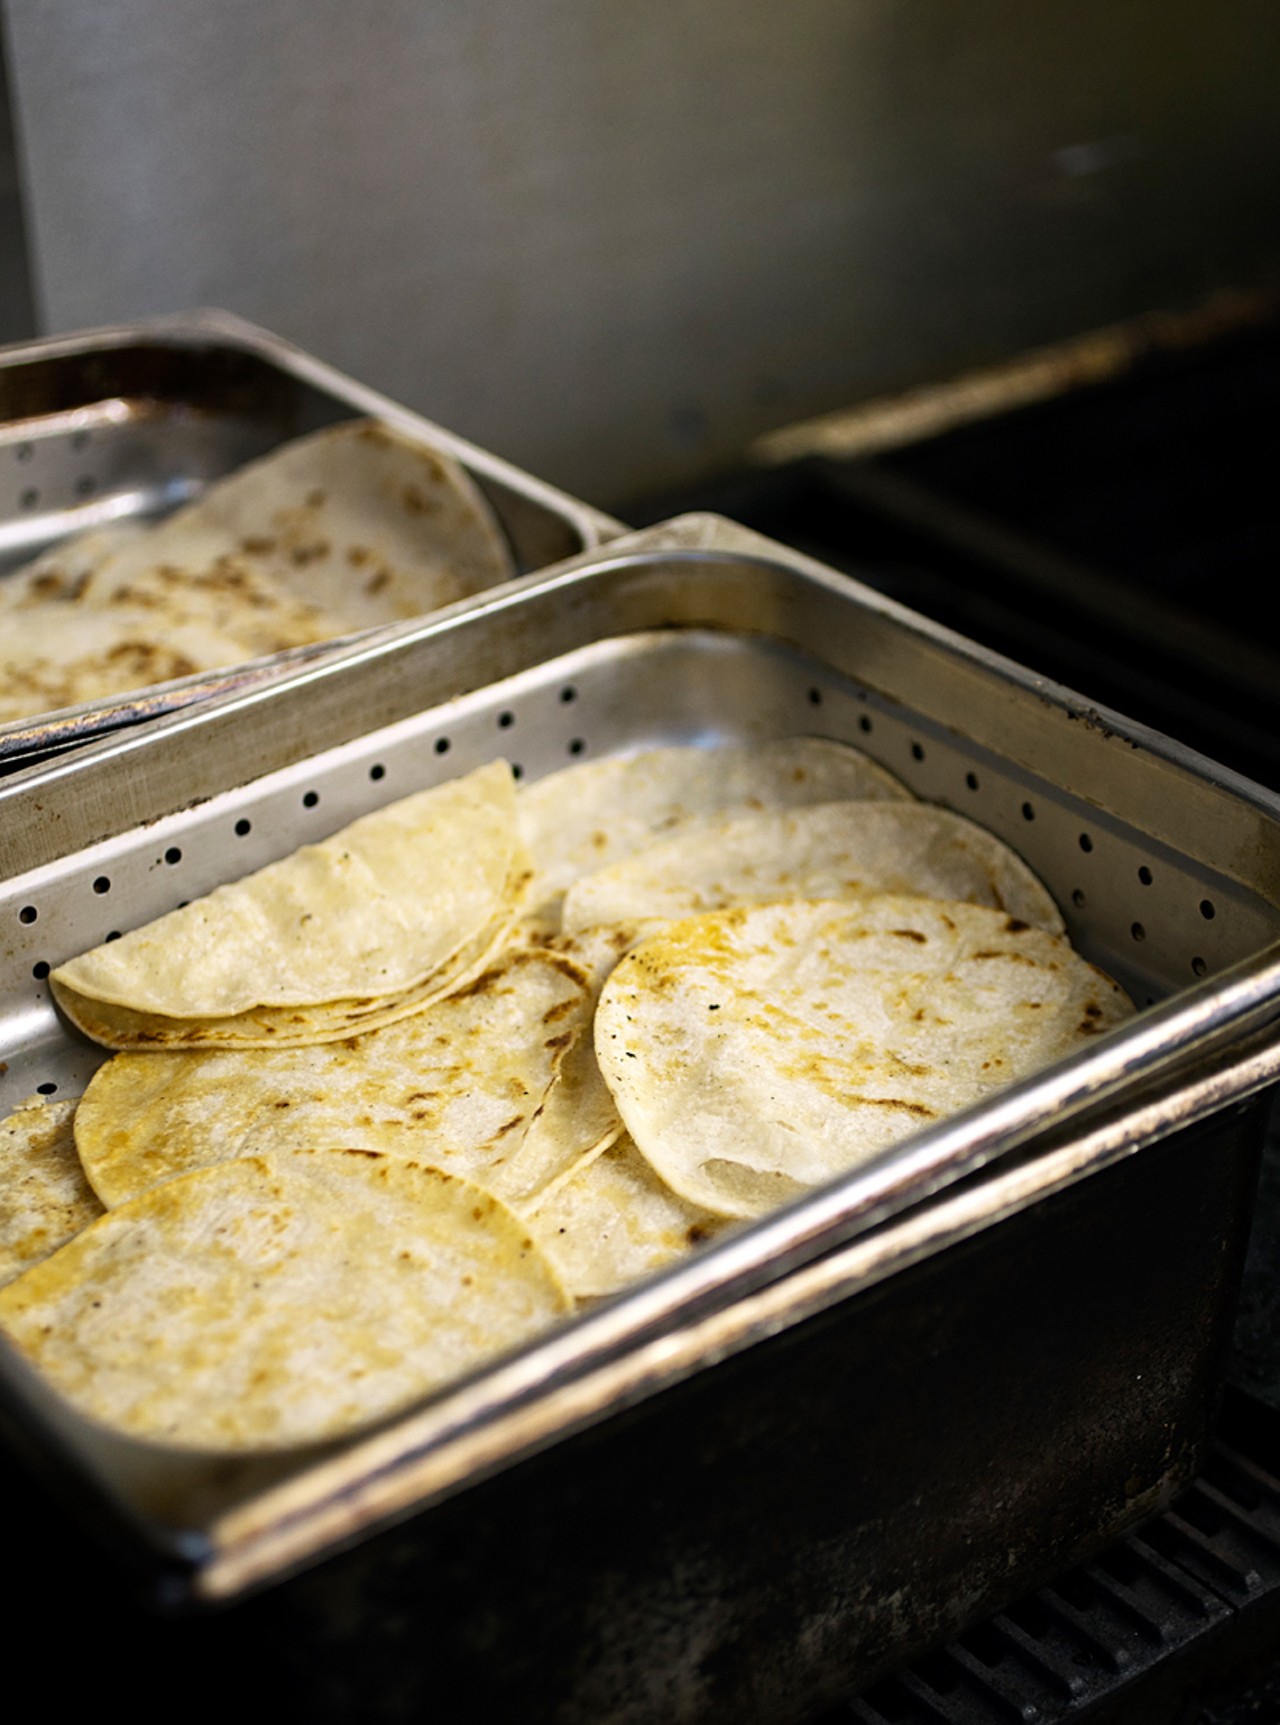 The tortillas are ready for fillings.